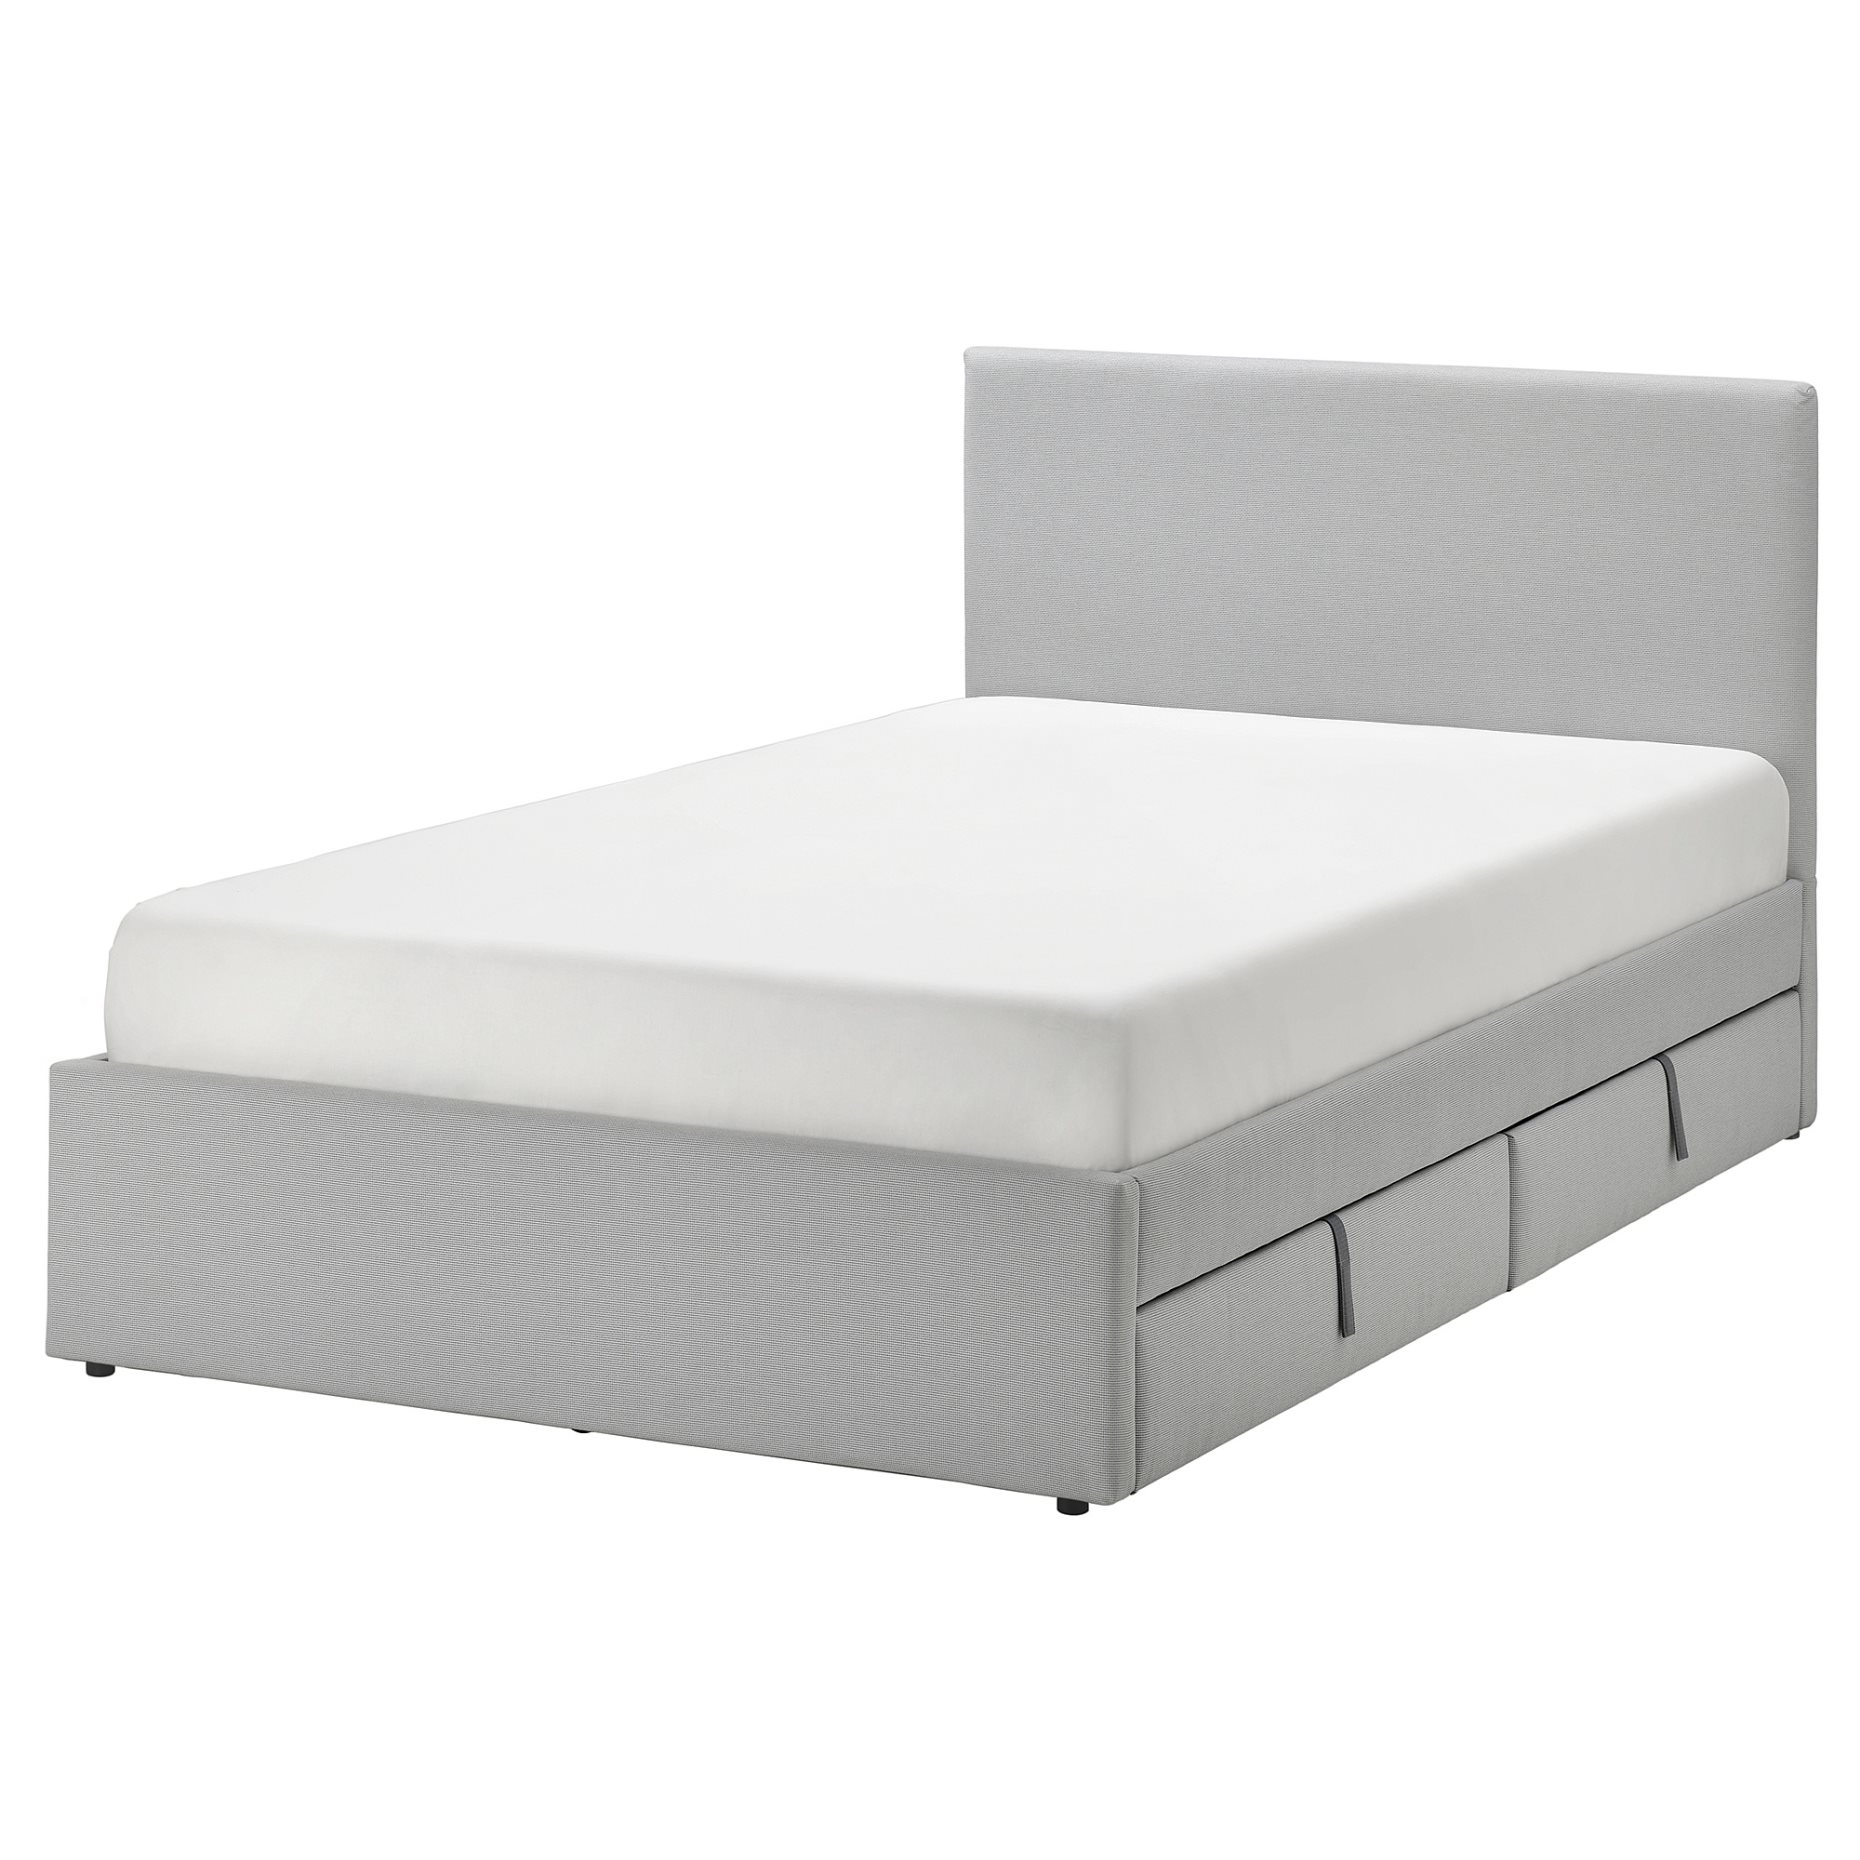 GLADSTAD, upholstered bed with 2 storage boxes, 120x200 cm, 194.067.69